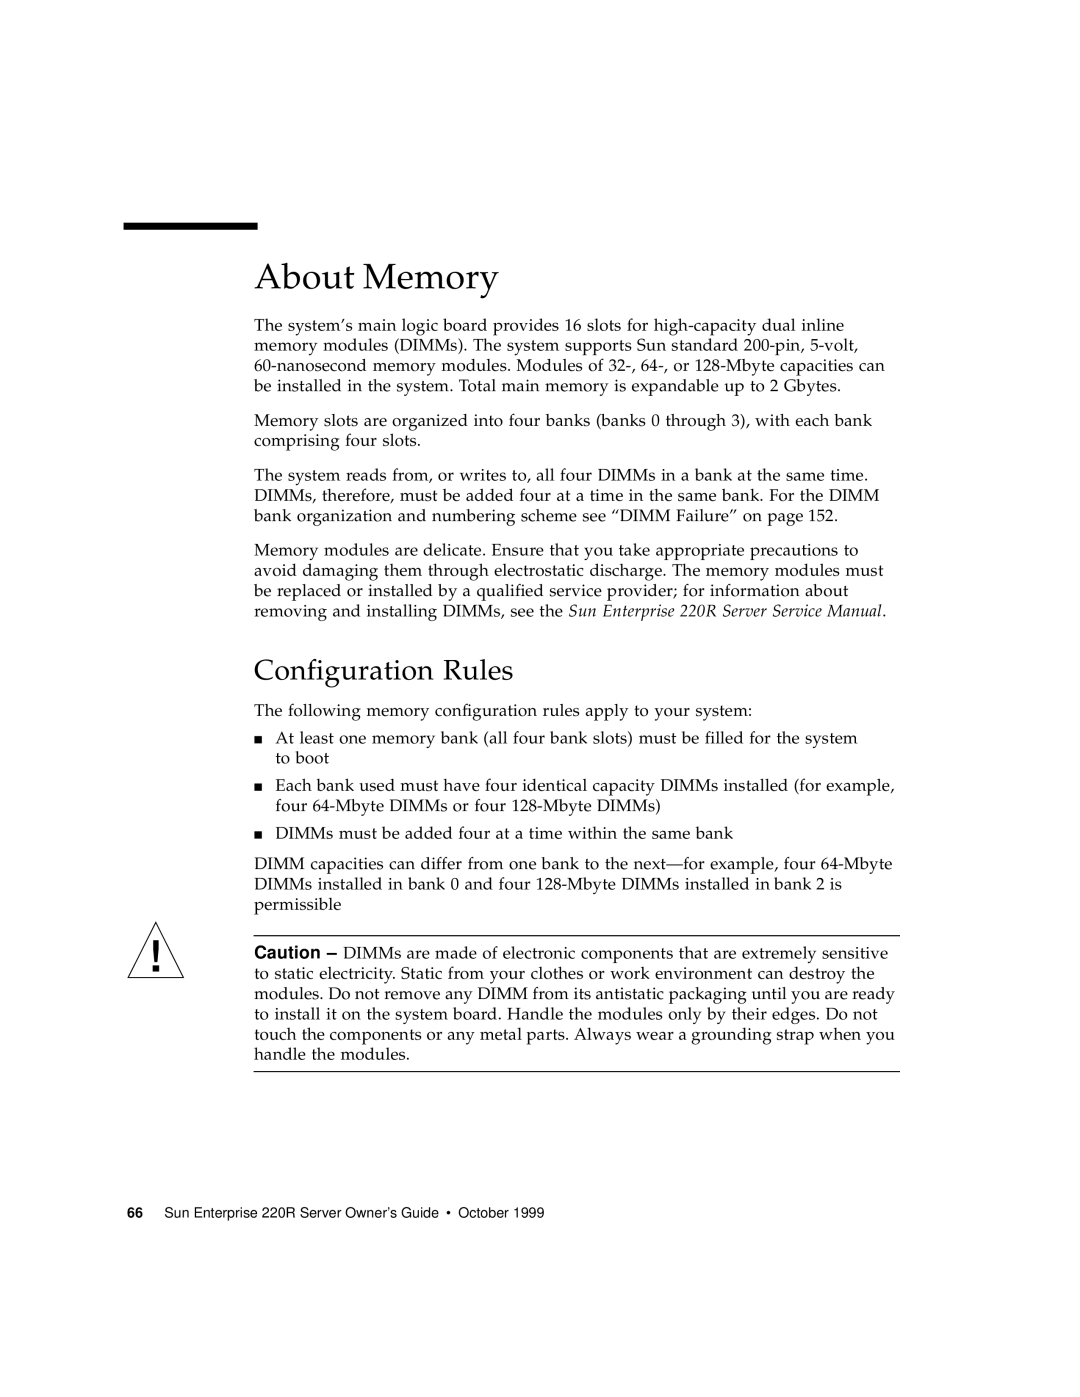 Sun Microsystems 220R manual About Memory, Configuration Rules 